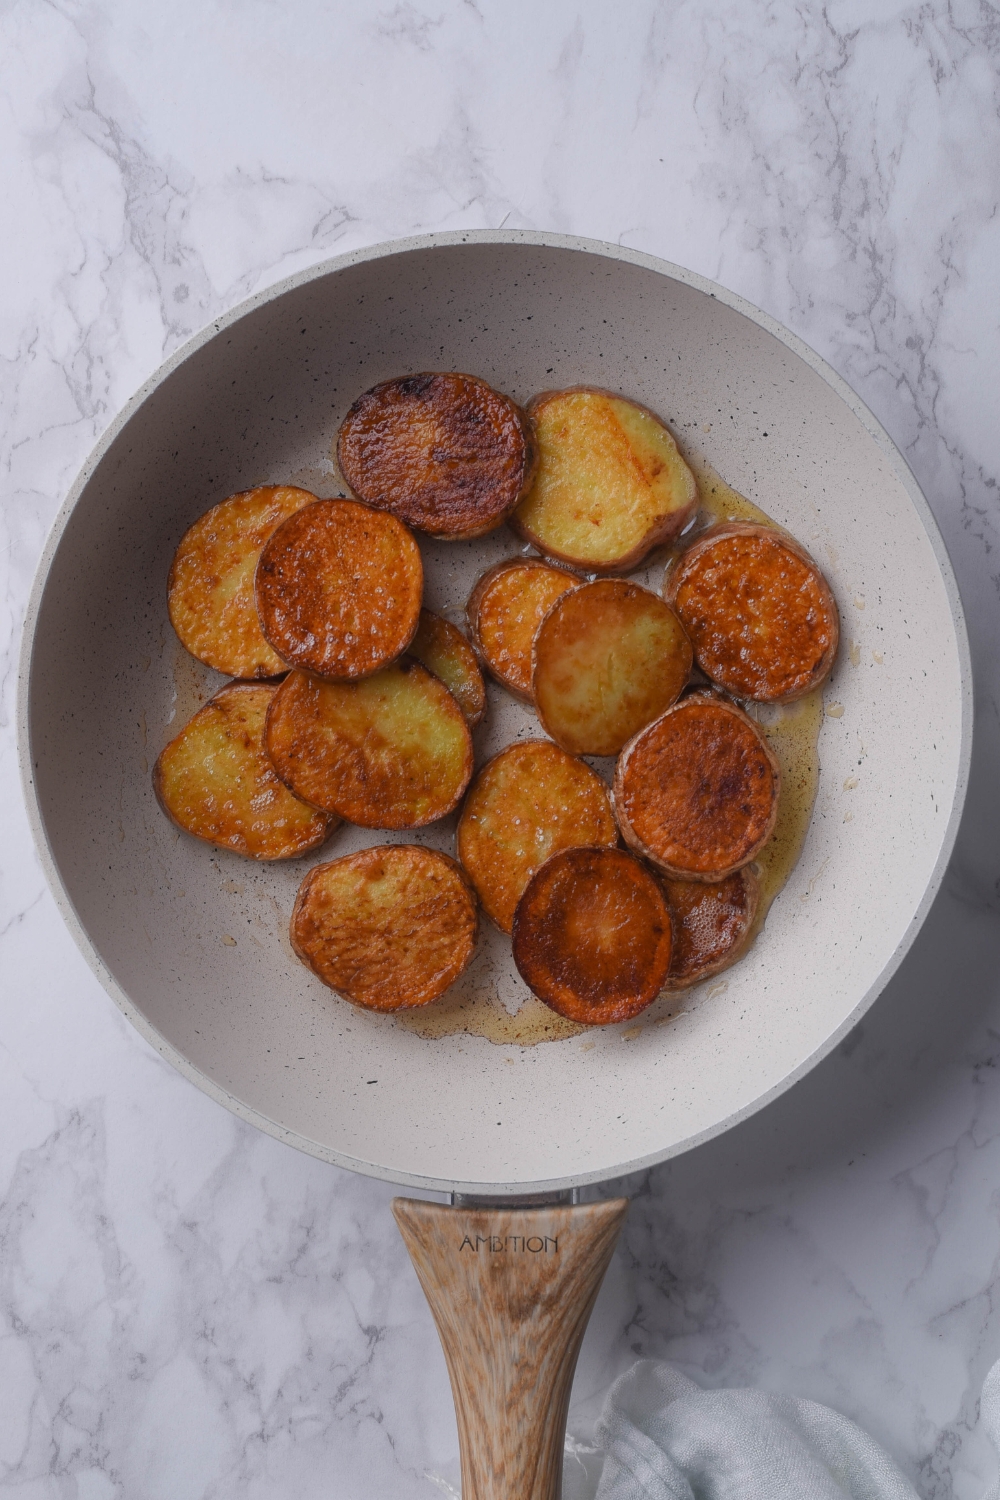 A frying pan with golden brown sliced potatoes.